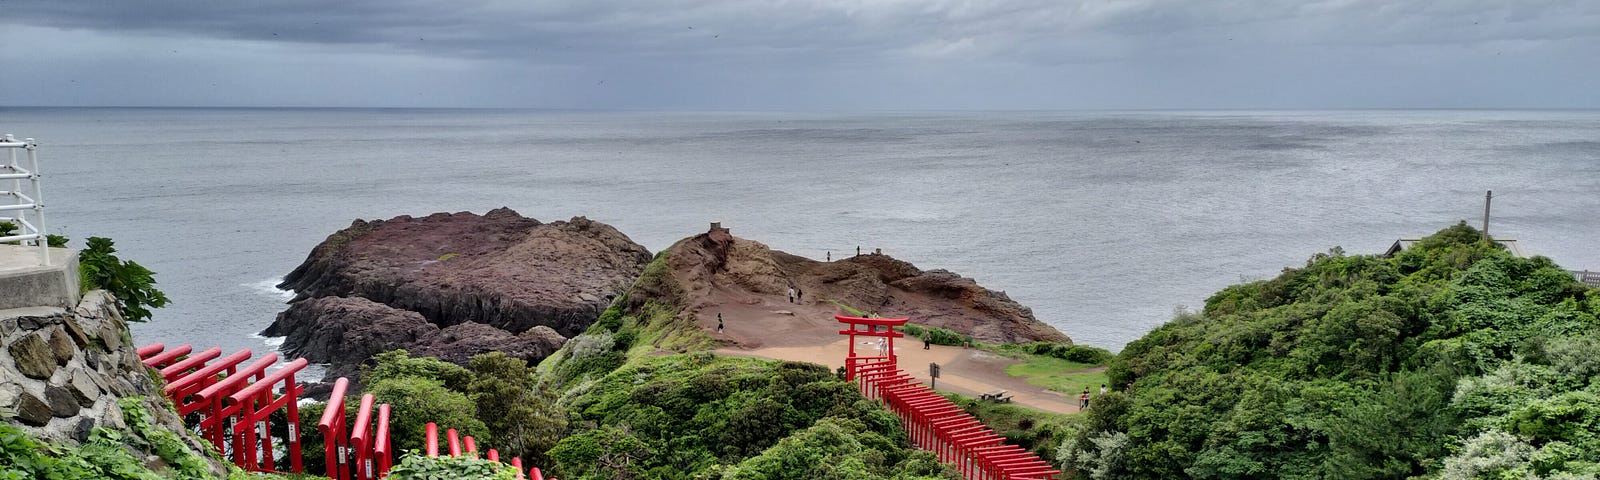 Motonosumi Inari Shrine — a picture of a row of torii gates located by the coast in Northern Yamaguchi prefecture.